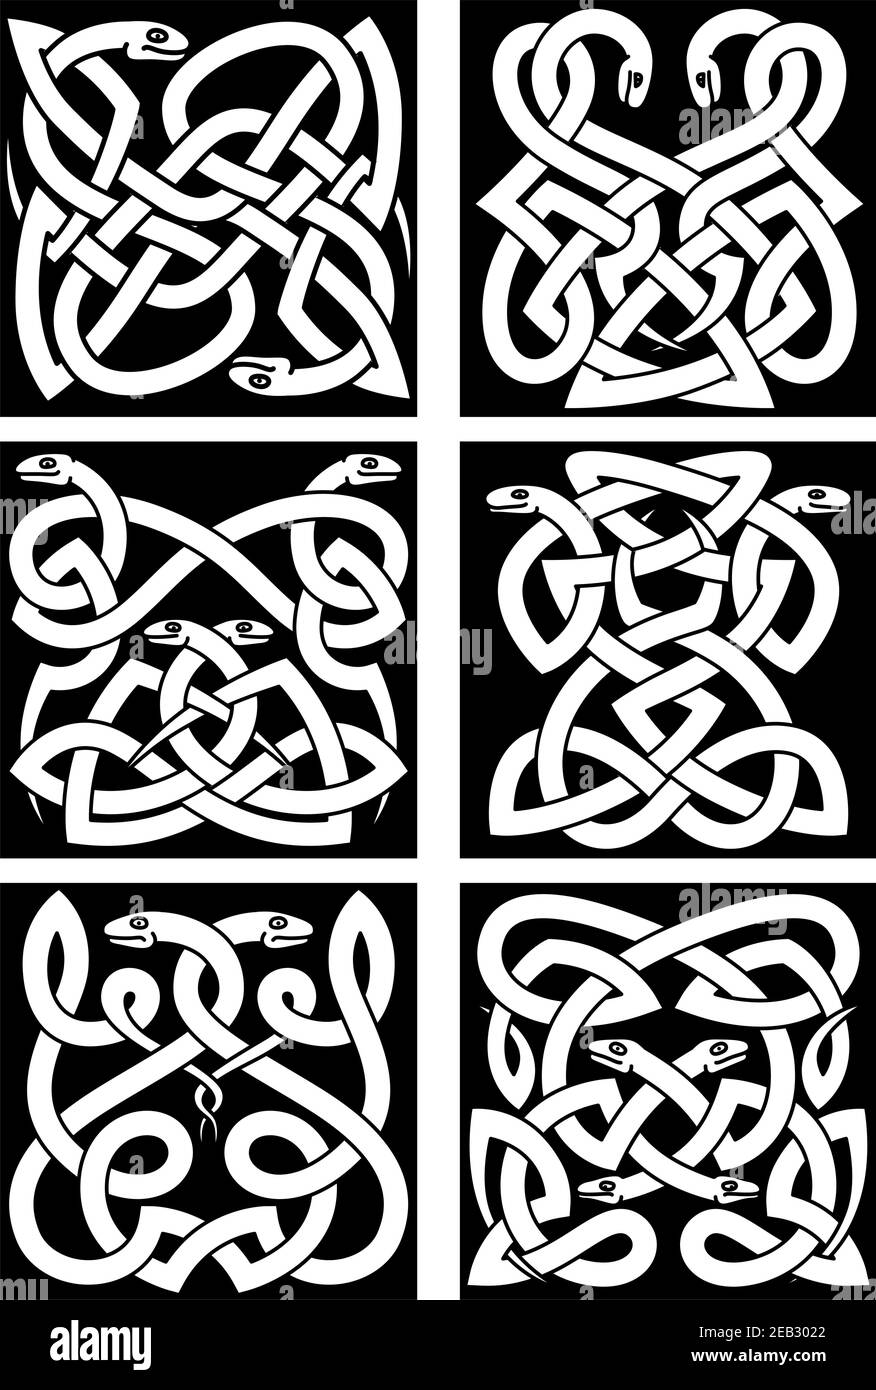 Celtic snakes knot patterns with intertwined reptiles and tribal ornament. Medieval embellishment or tattoo design elements Stock Vector